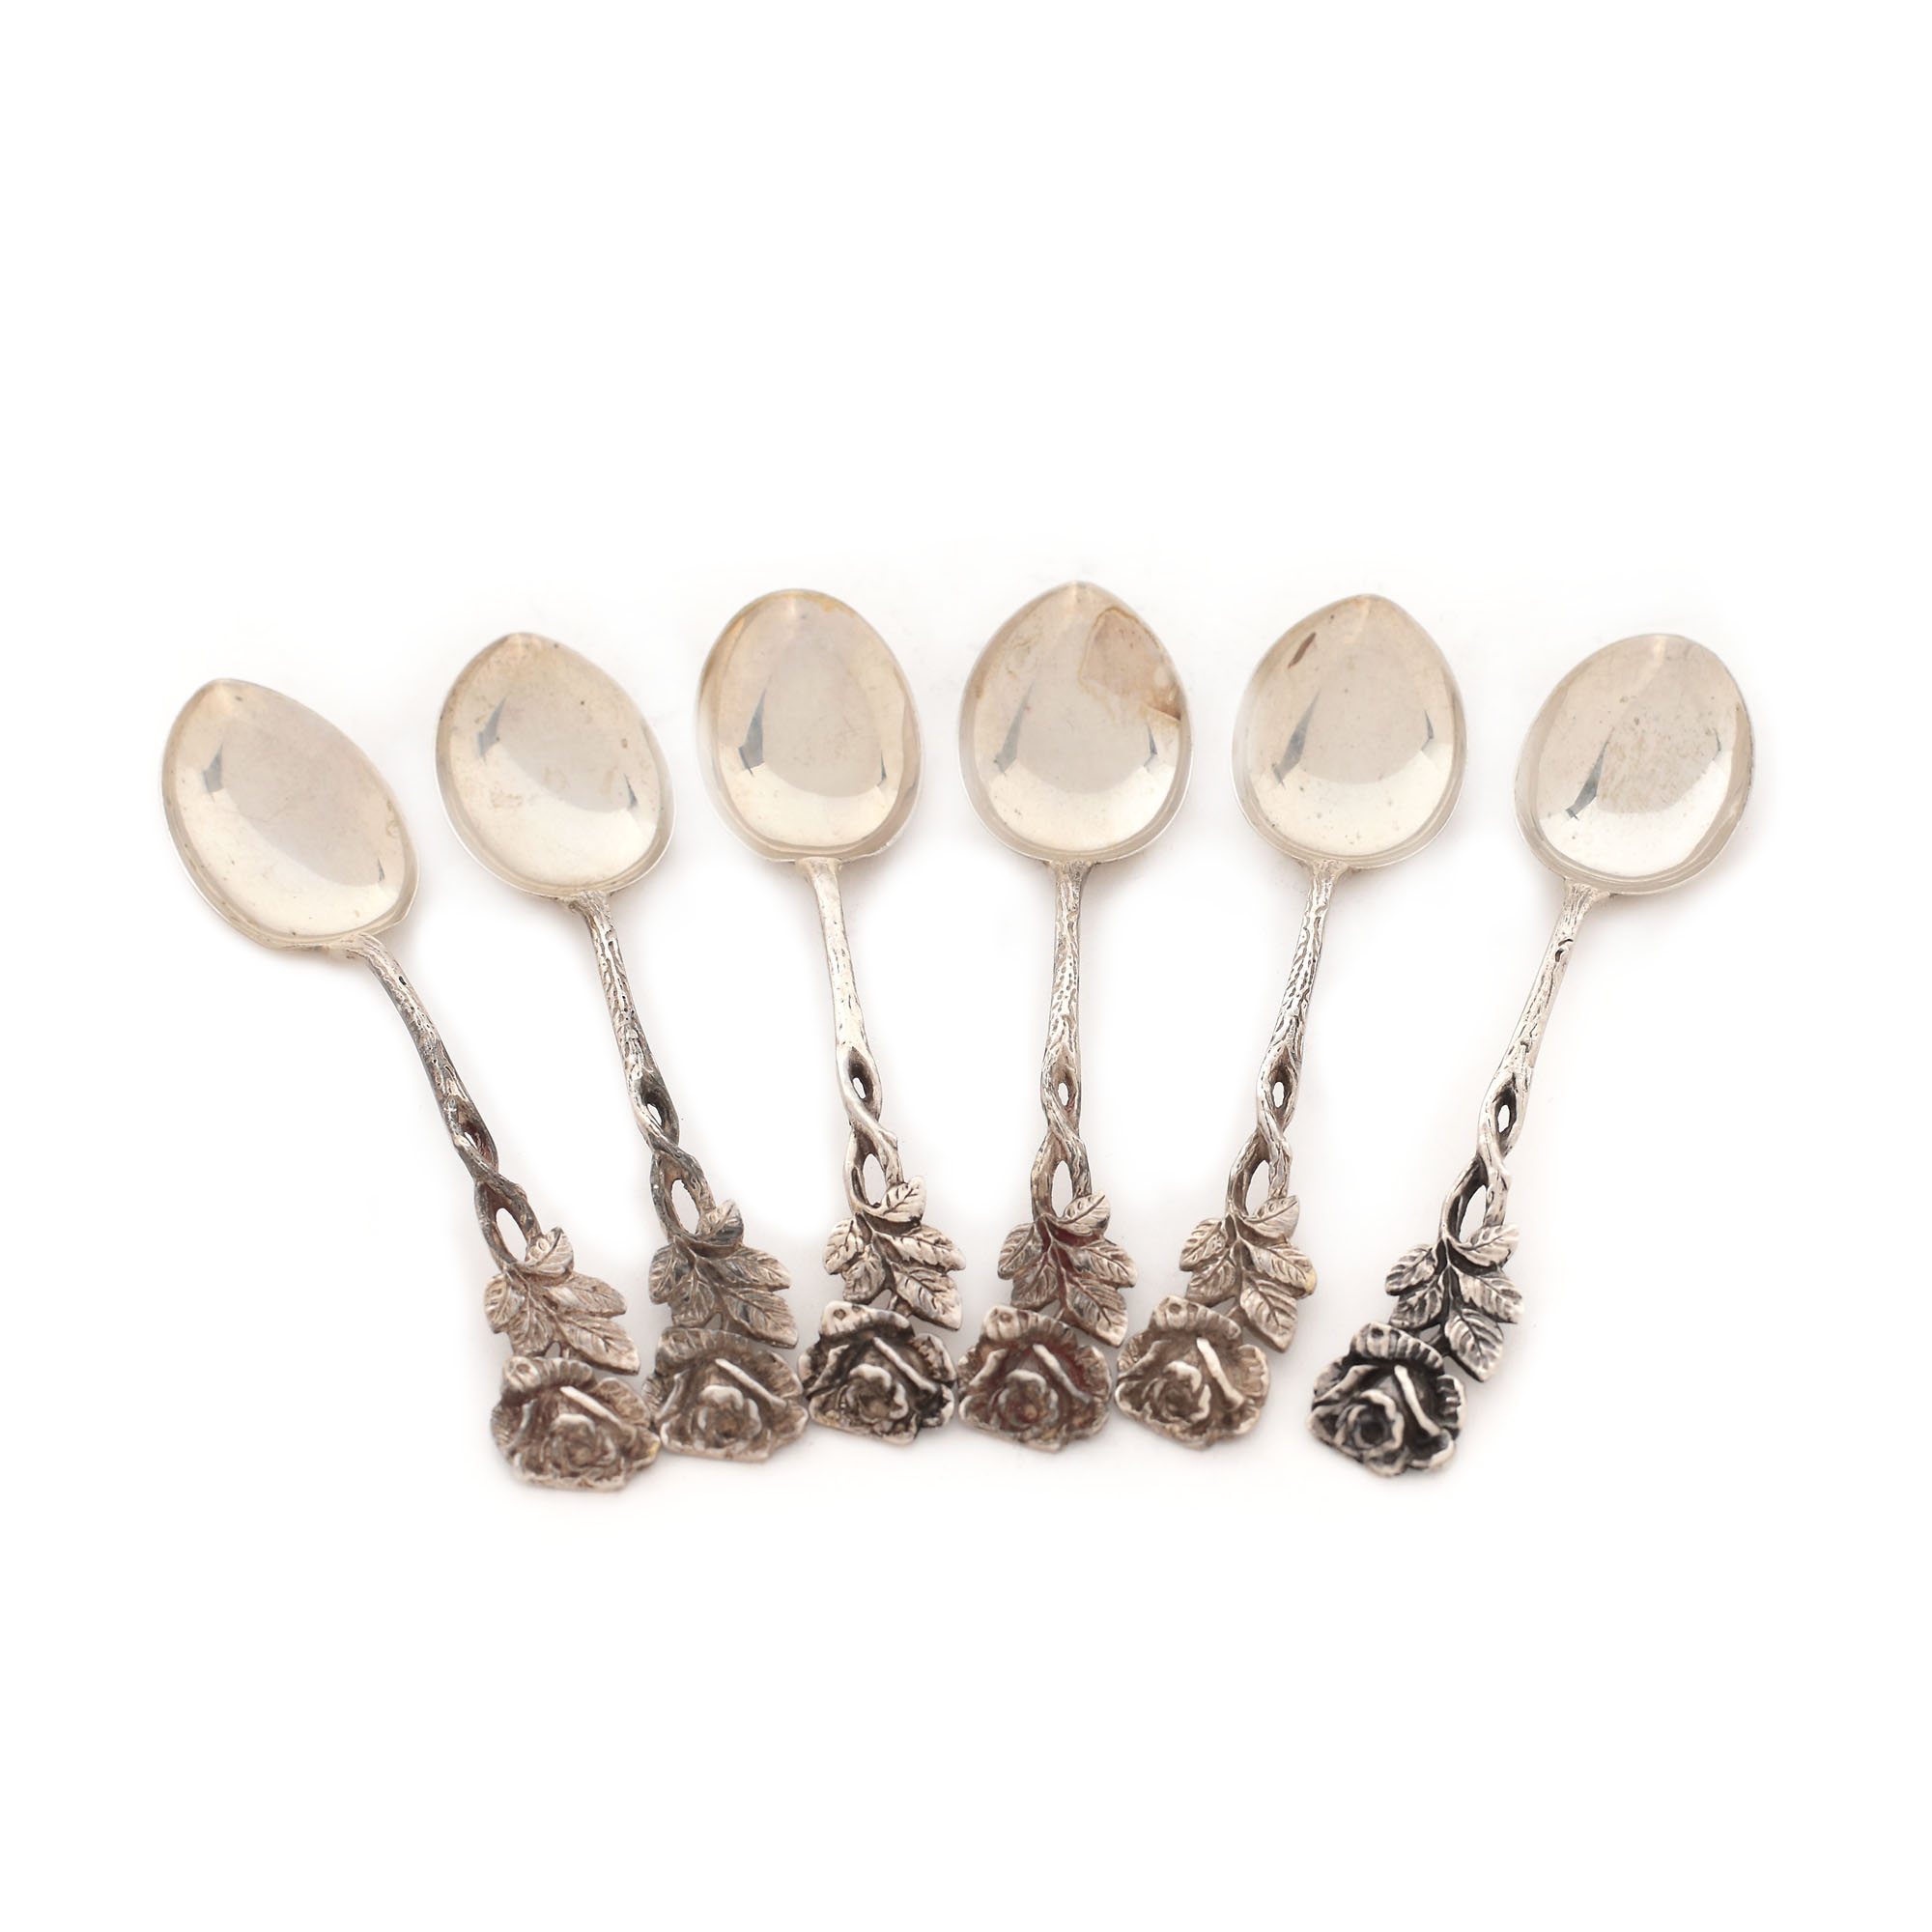 German workshop, Albert Bodemer silver set, consisting of six teaspoons and six forks, with rose-sha - Image 7 of 9